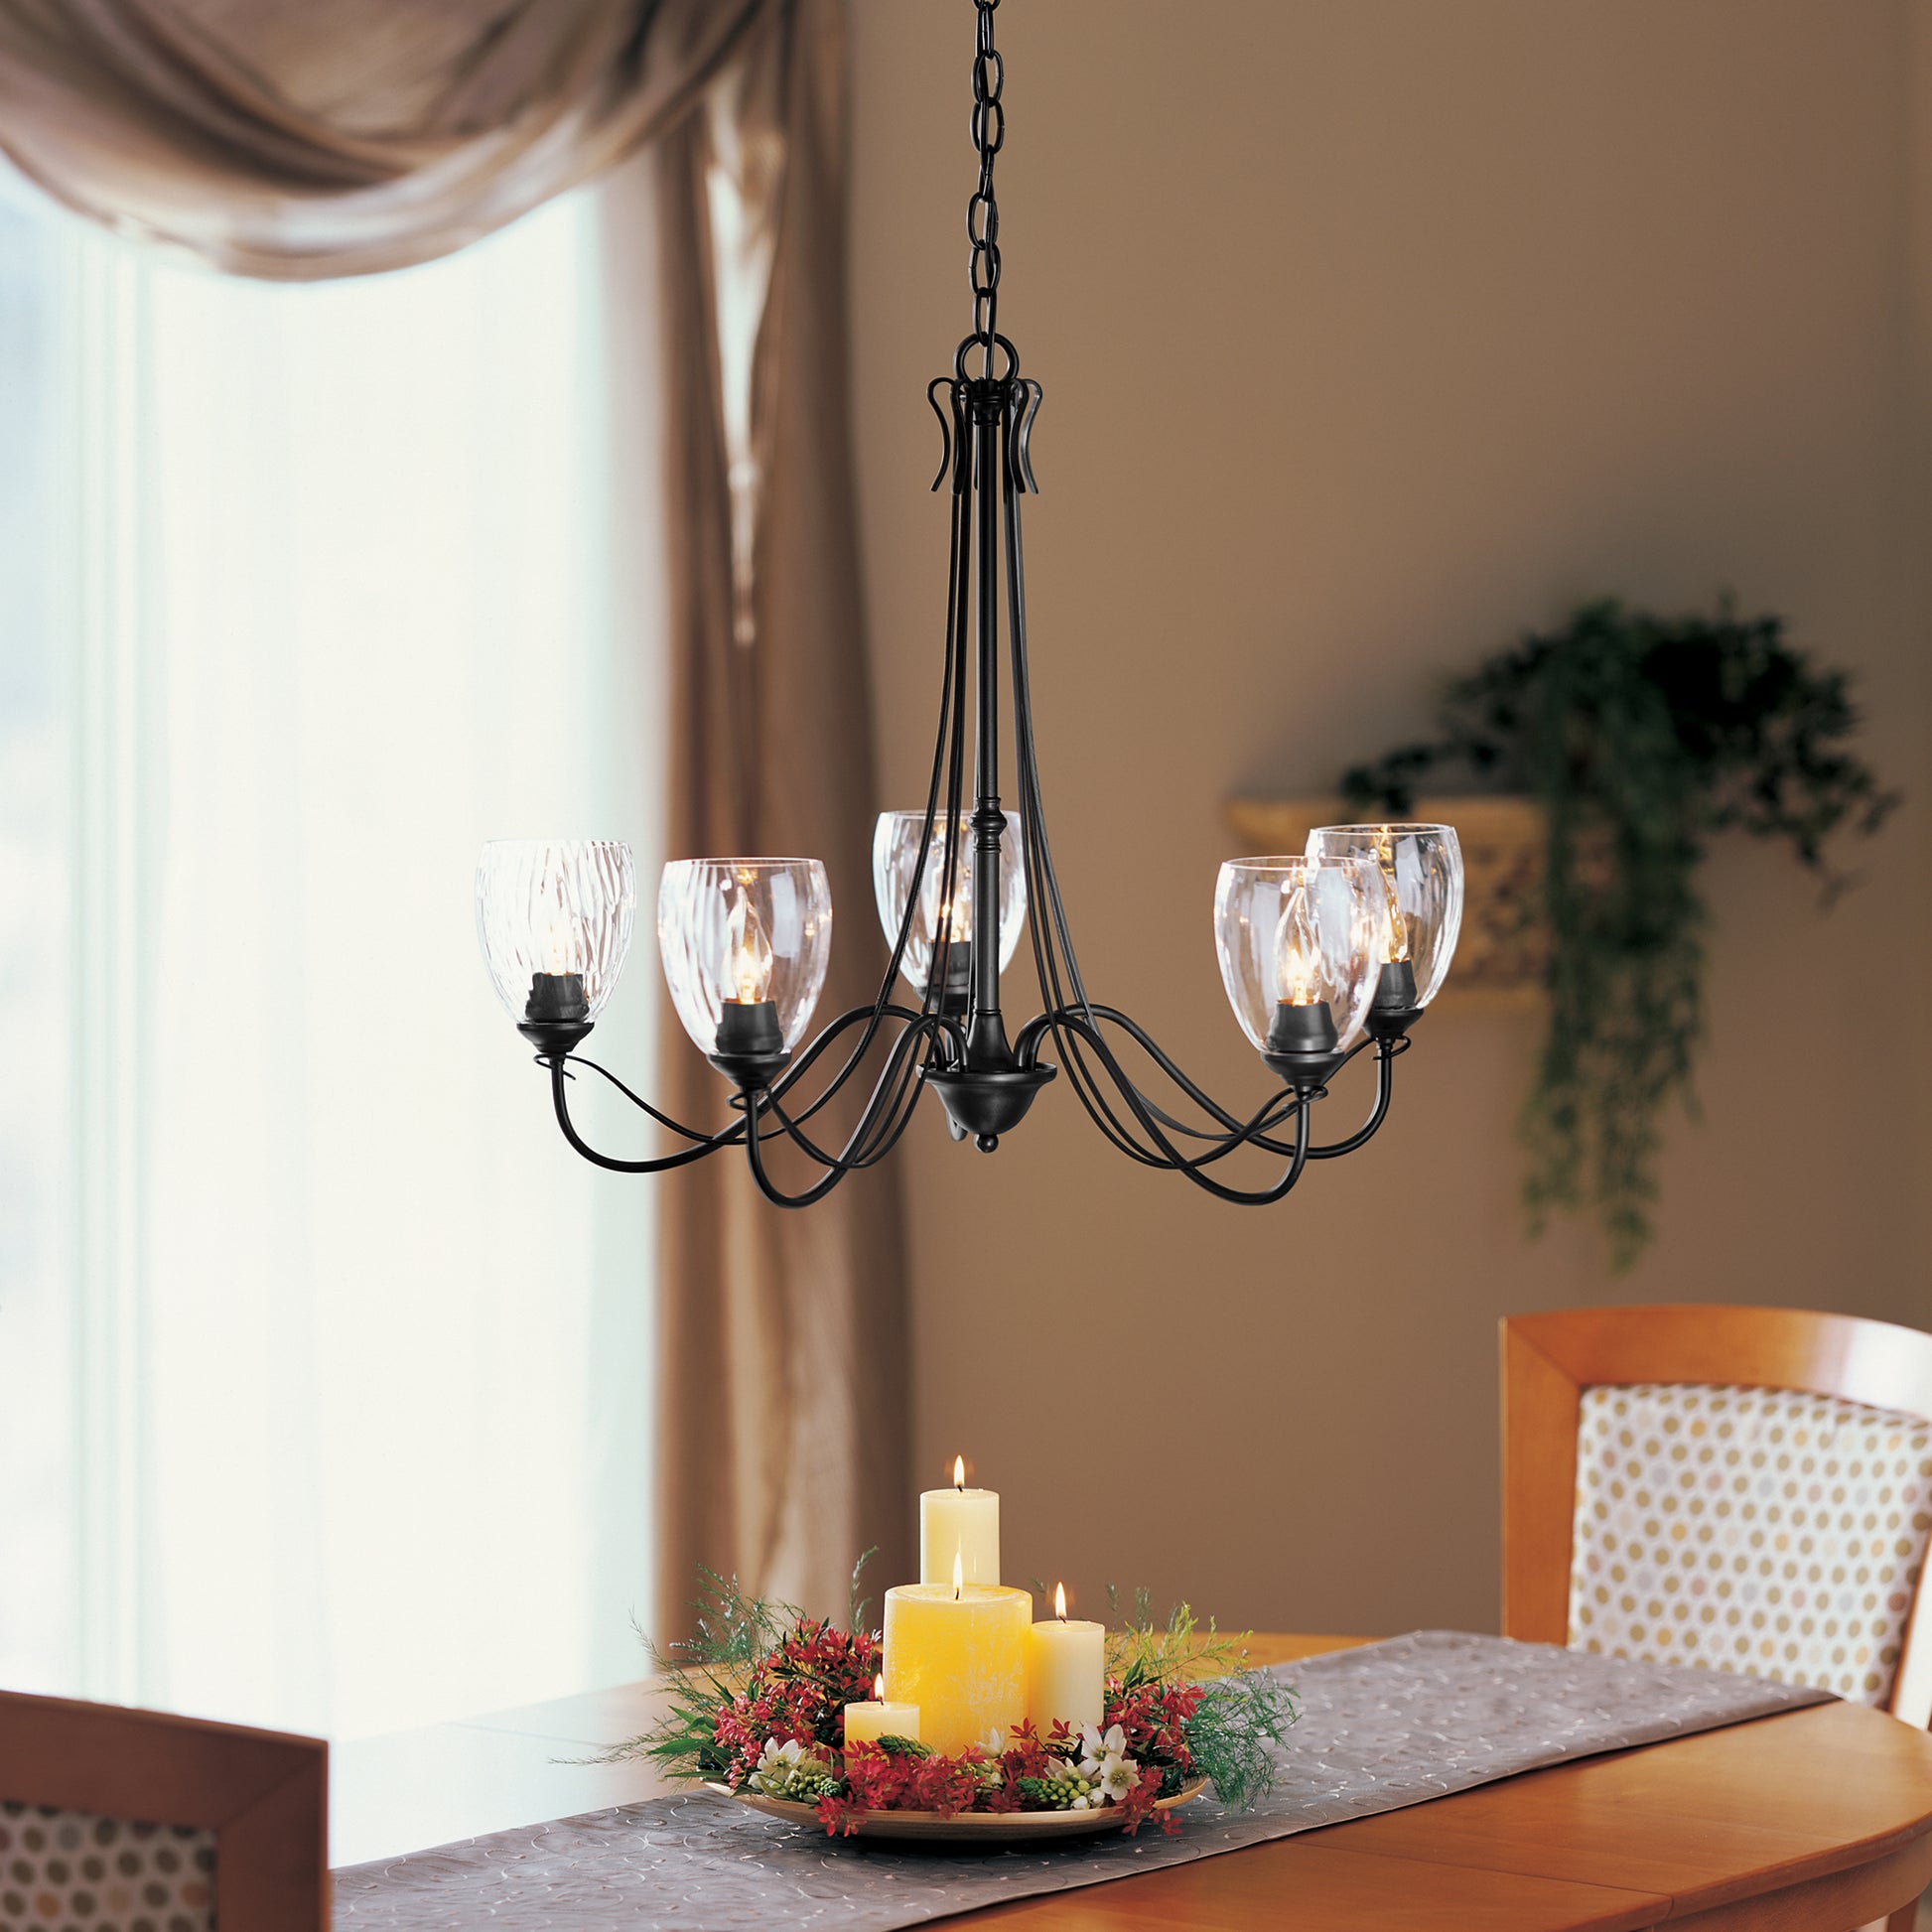 A dining room table with a Trellis 5-Arm Chandelier featuring a bronze finish from Hubbardton Forge.